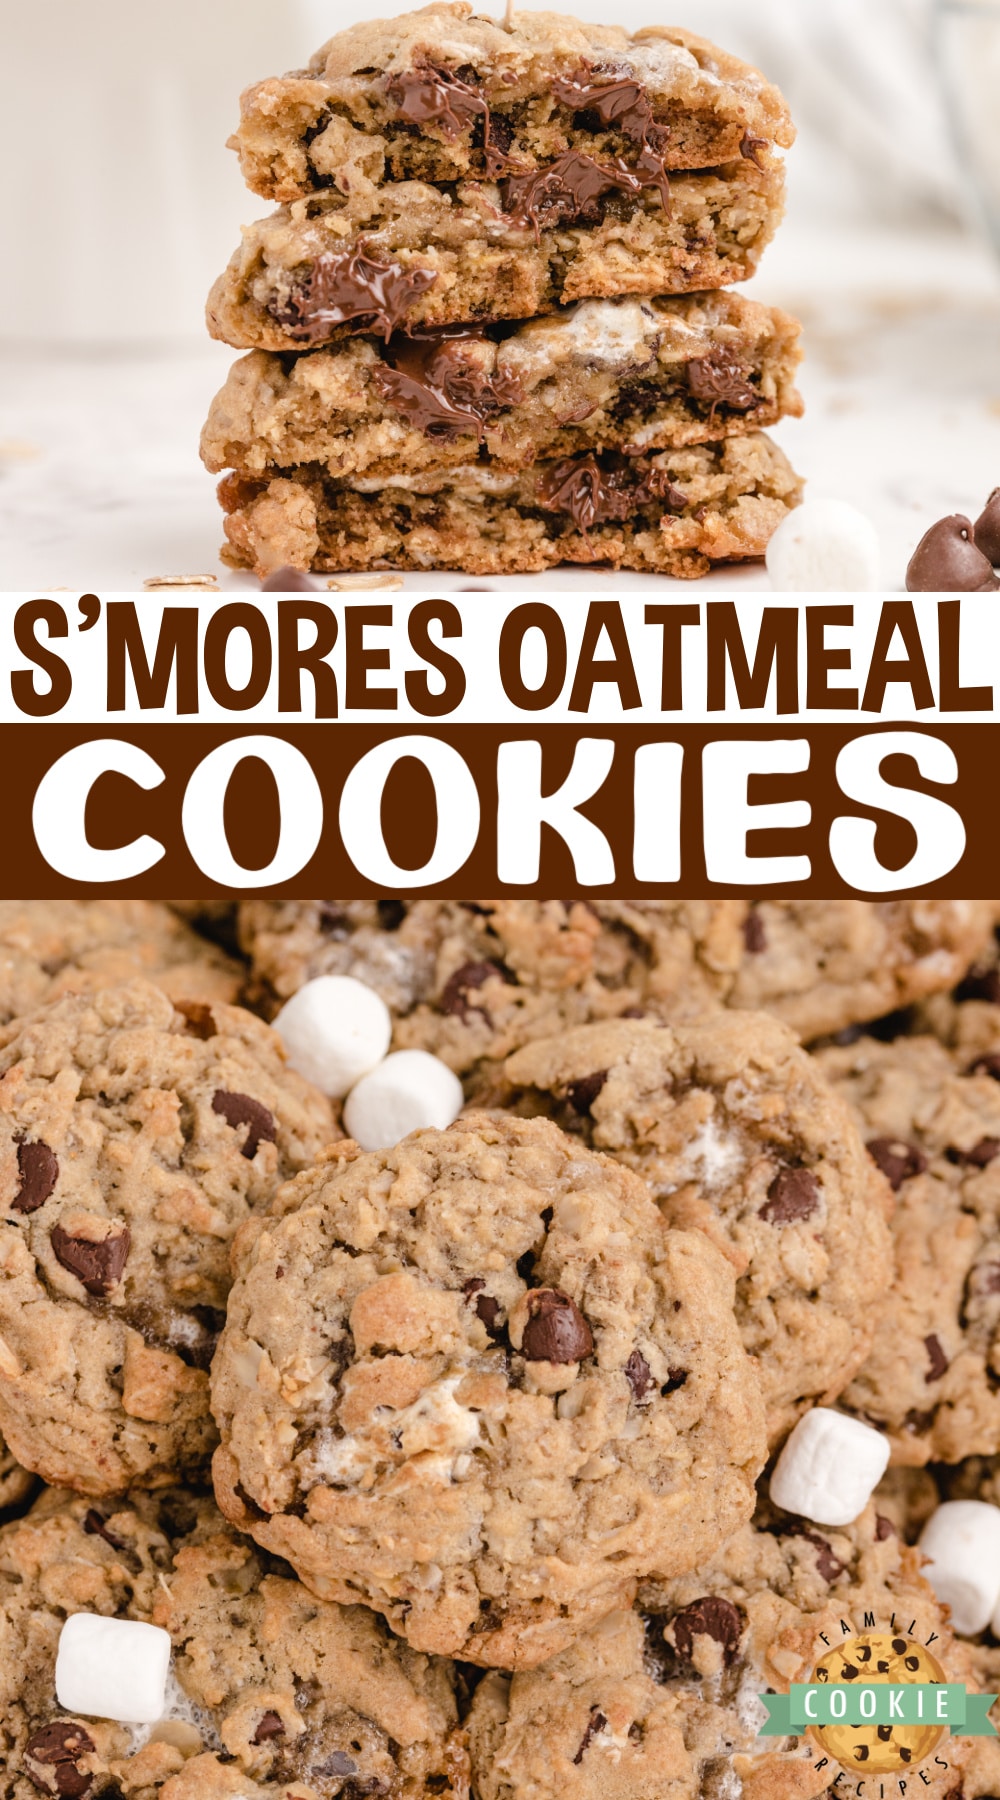 S'mores Oatmeal Cookies are full of oats, chocolate chips and mini marshmallows. Soft, chewy oatmeal cookies that taste just like s'mores! via @buttergirls